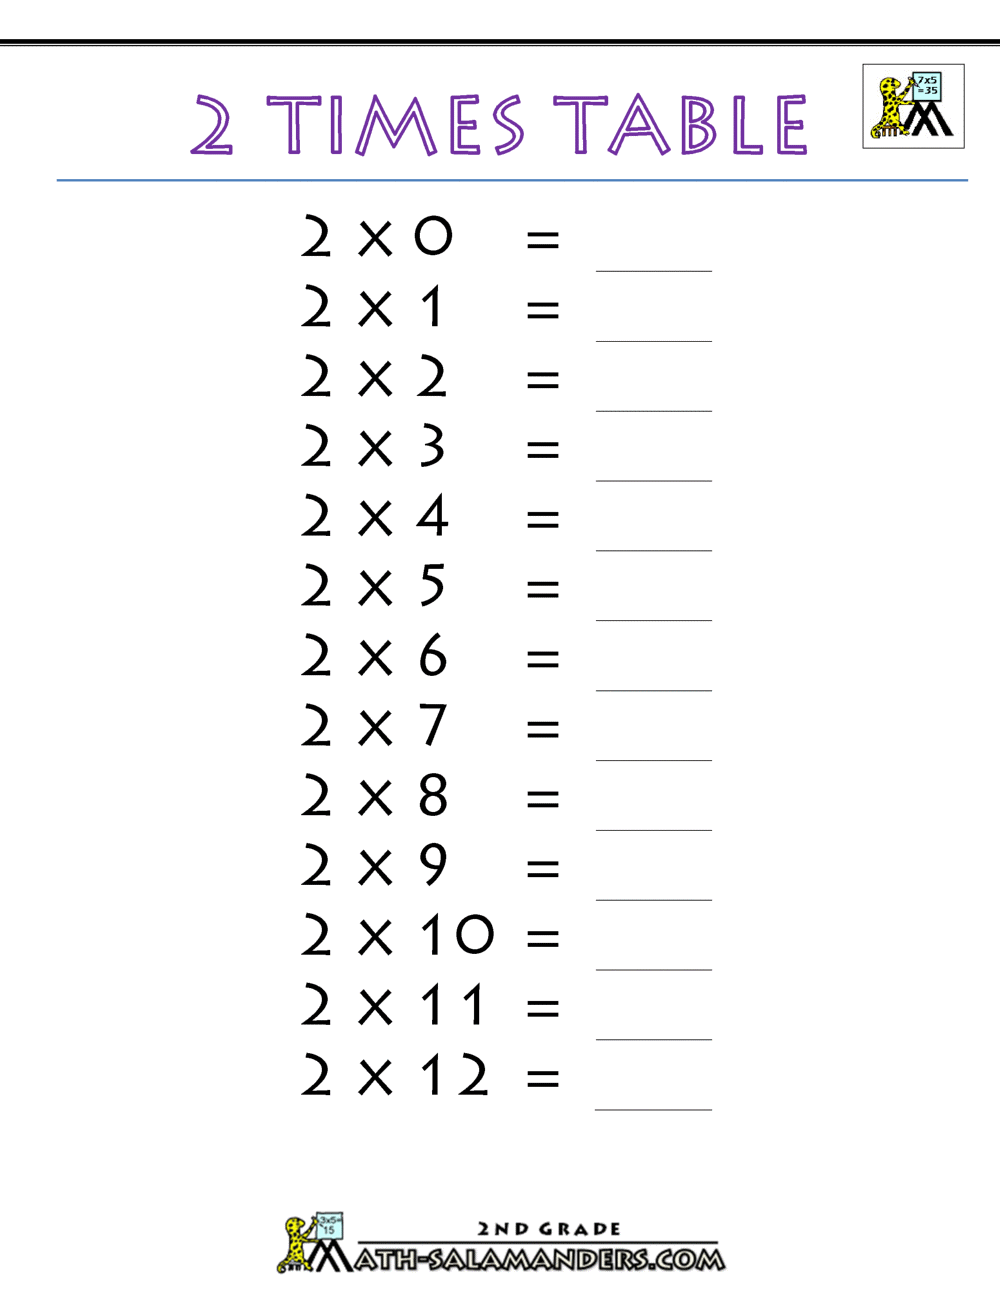 20 Times Table Throughout 2 Times Table Worksheet